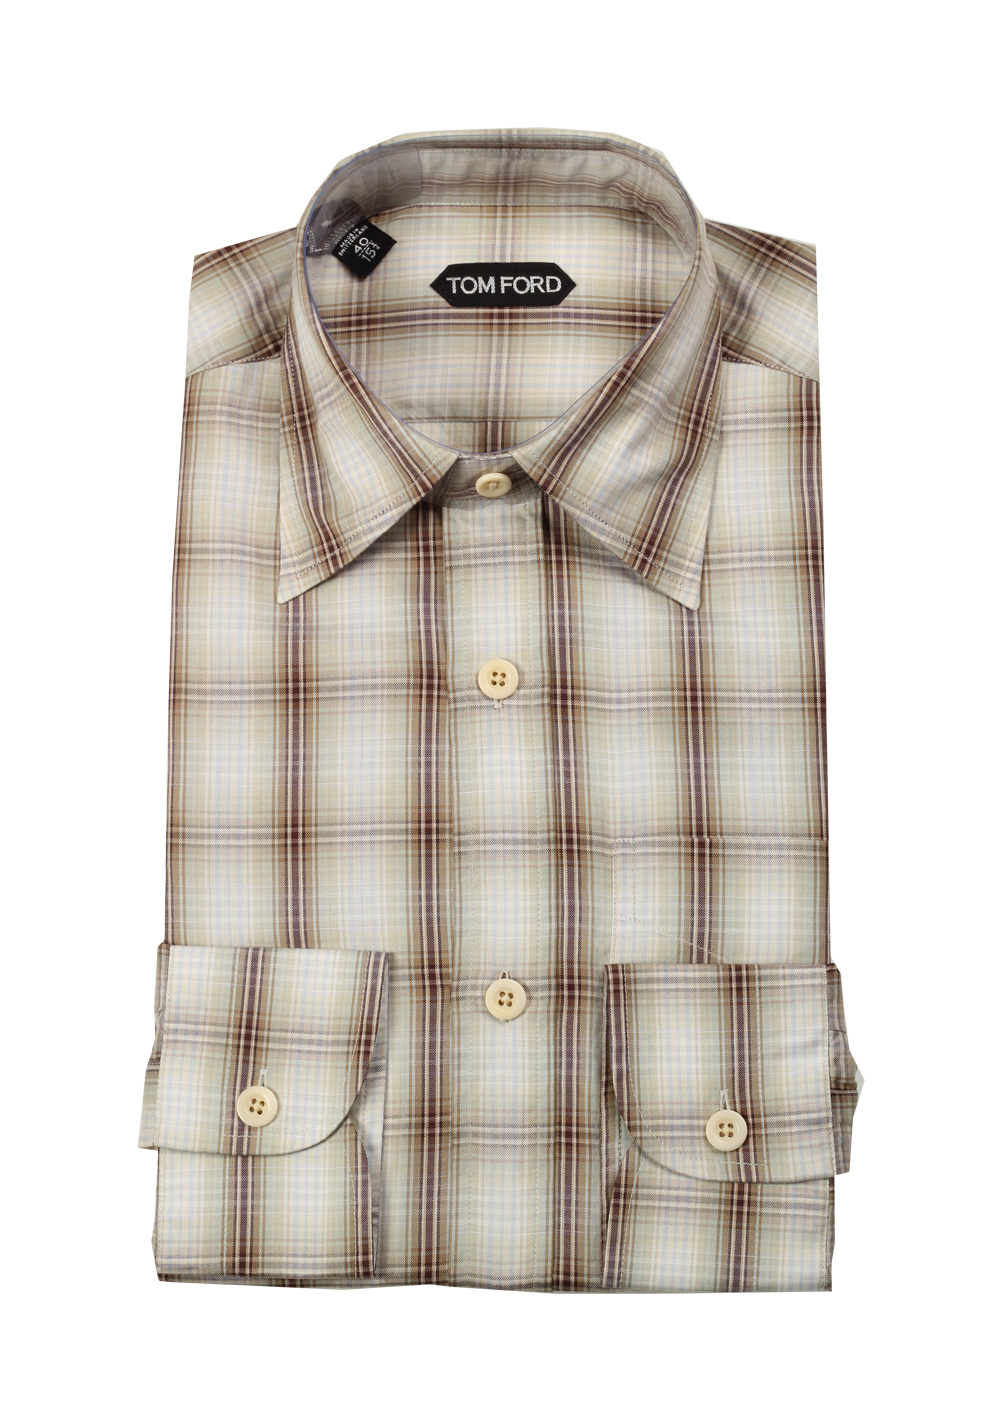 TOM FORD Checked Green Brown Dress Shirt Size 40 / 15,75 U.S. | Costume Limité